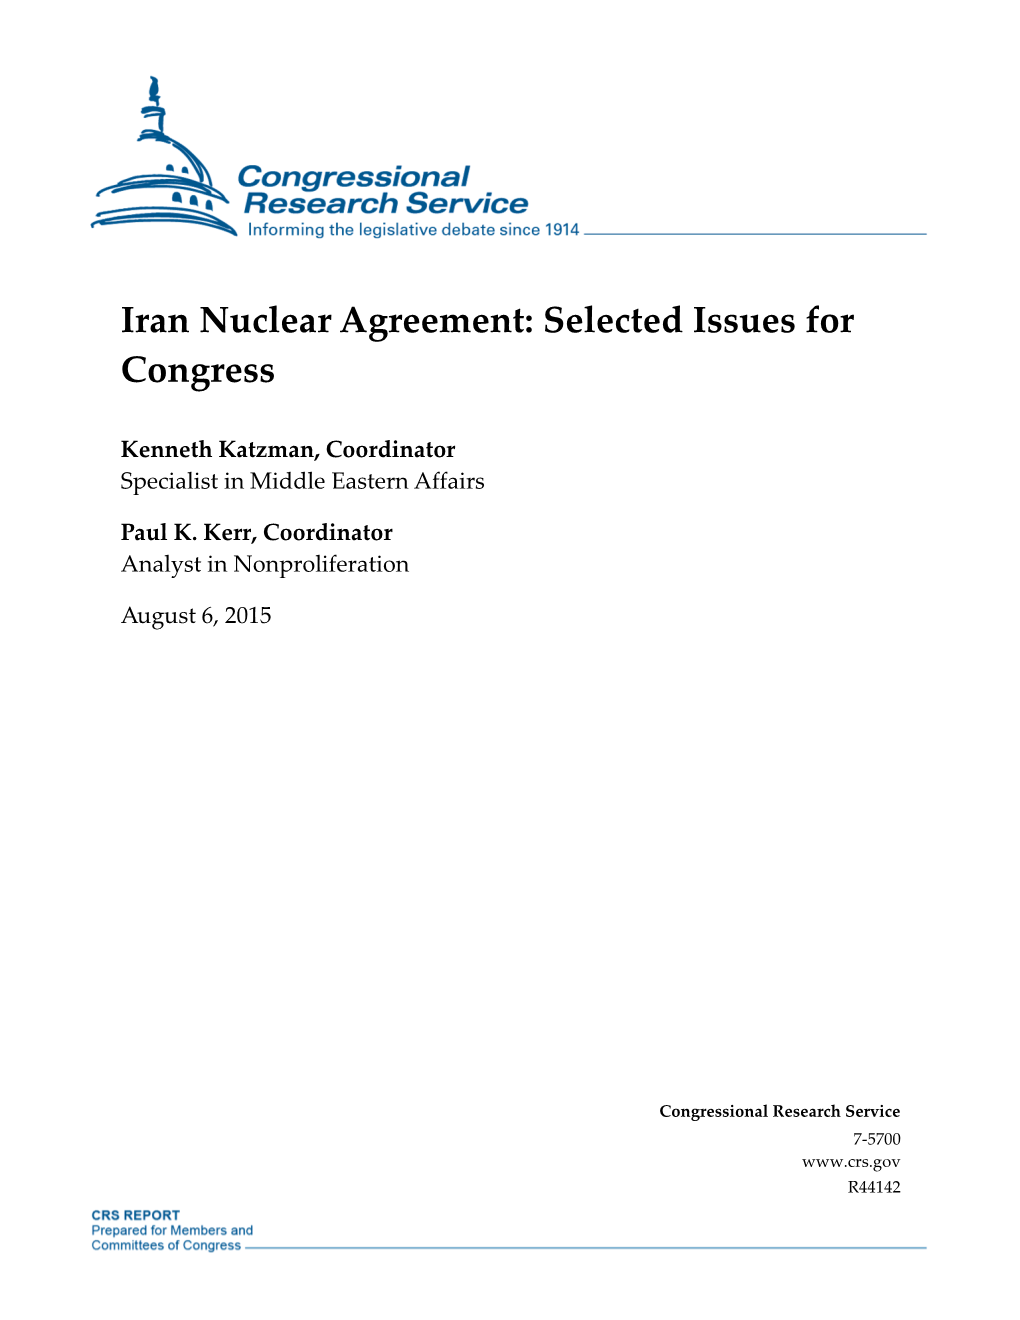 Iran Nuclear Agreement: Selected Issues for Congress